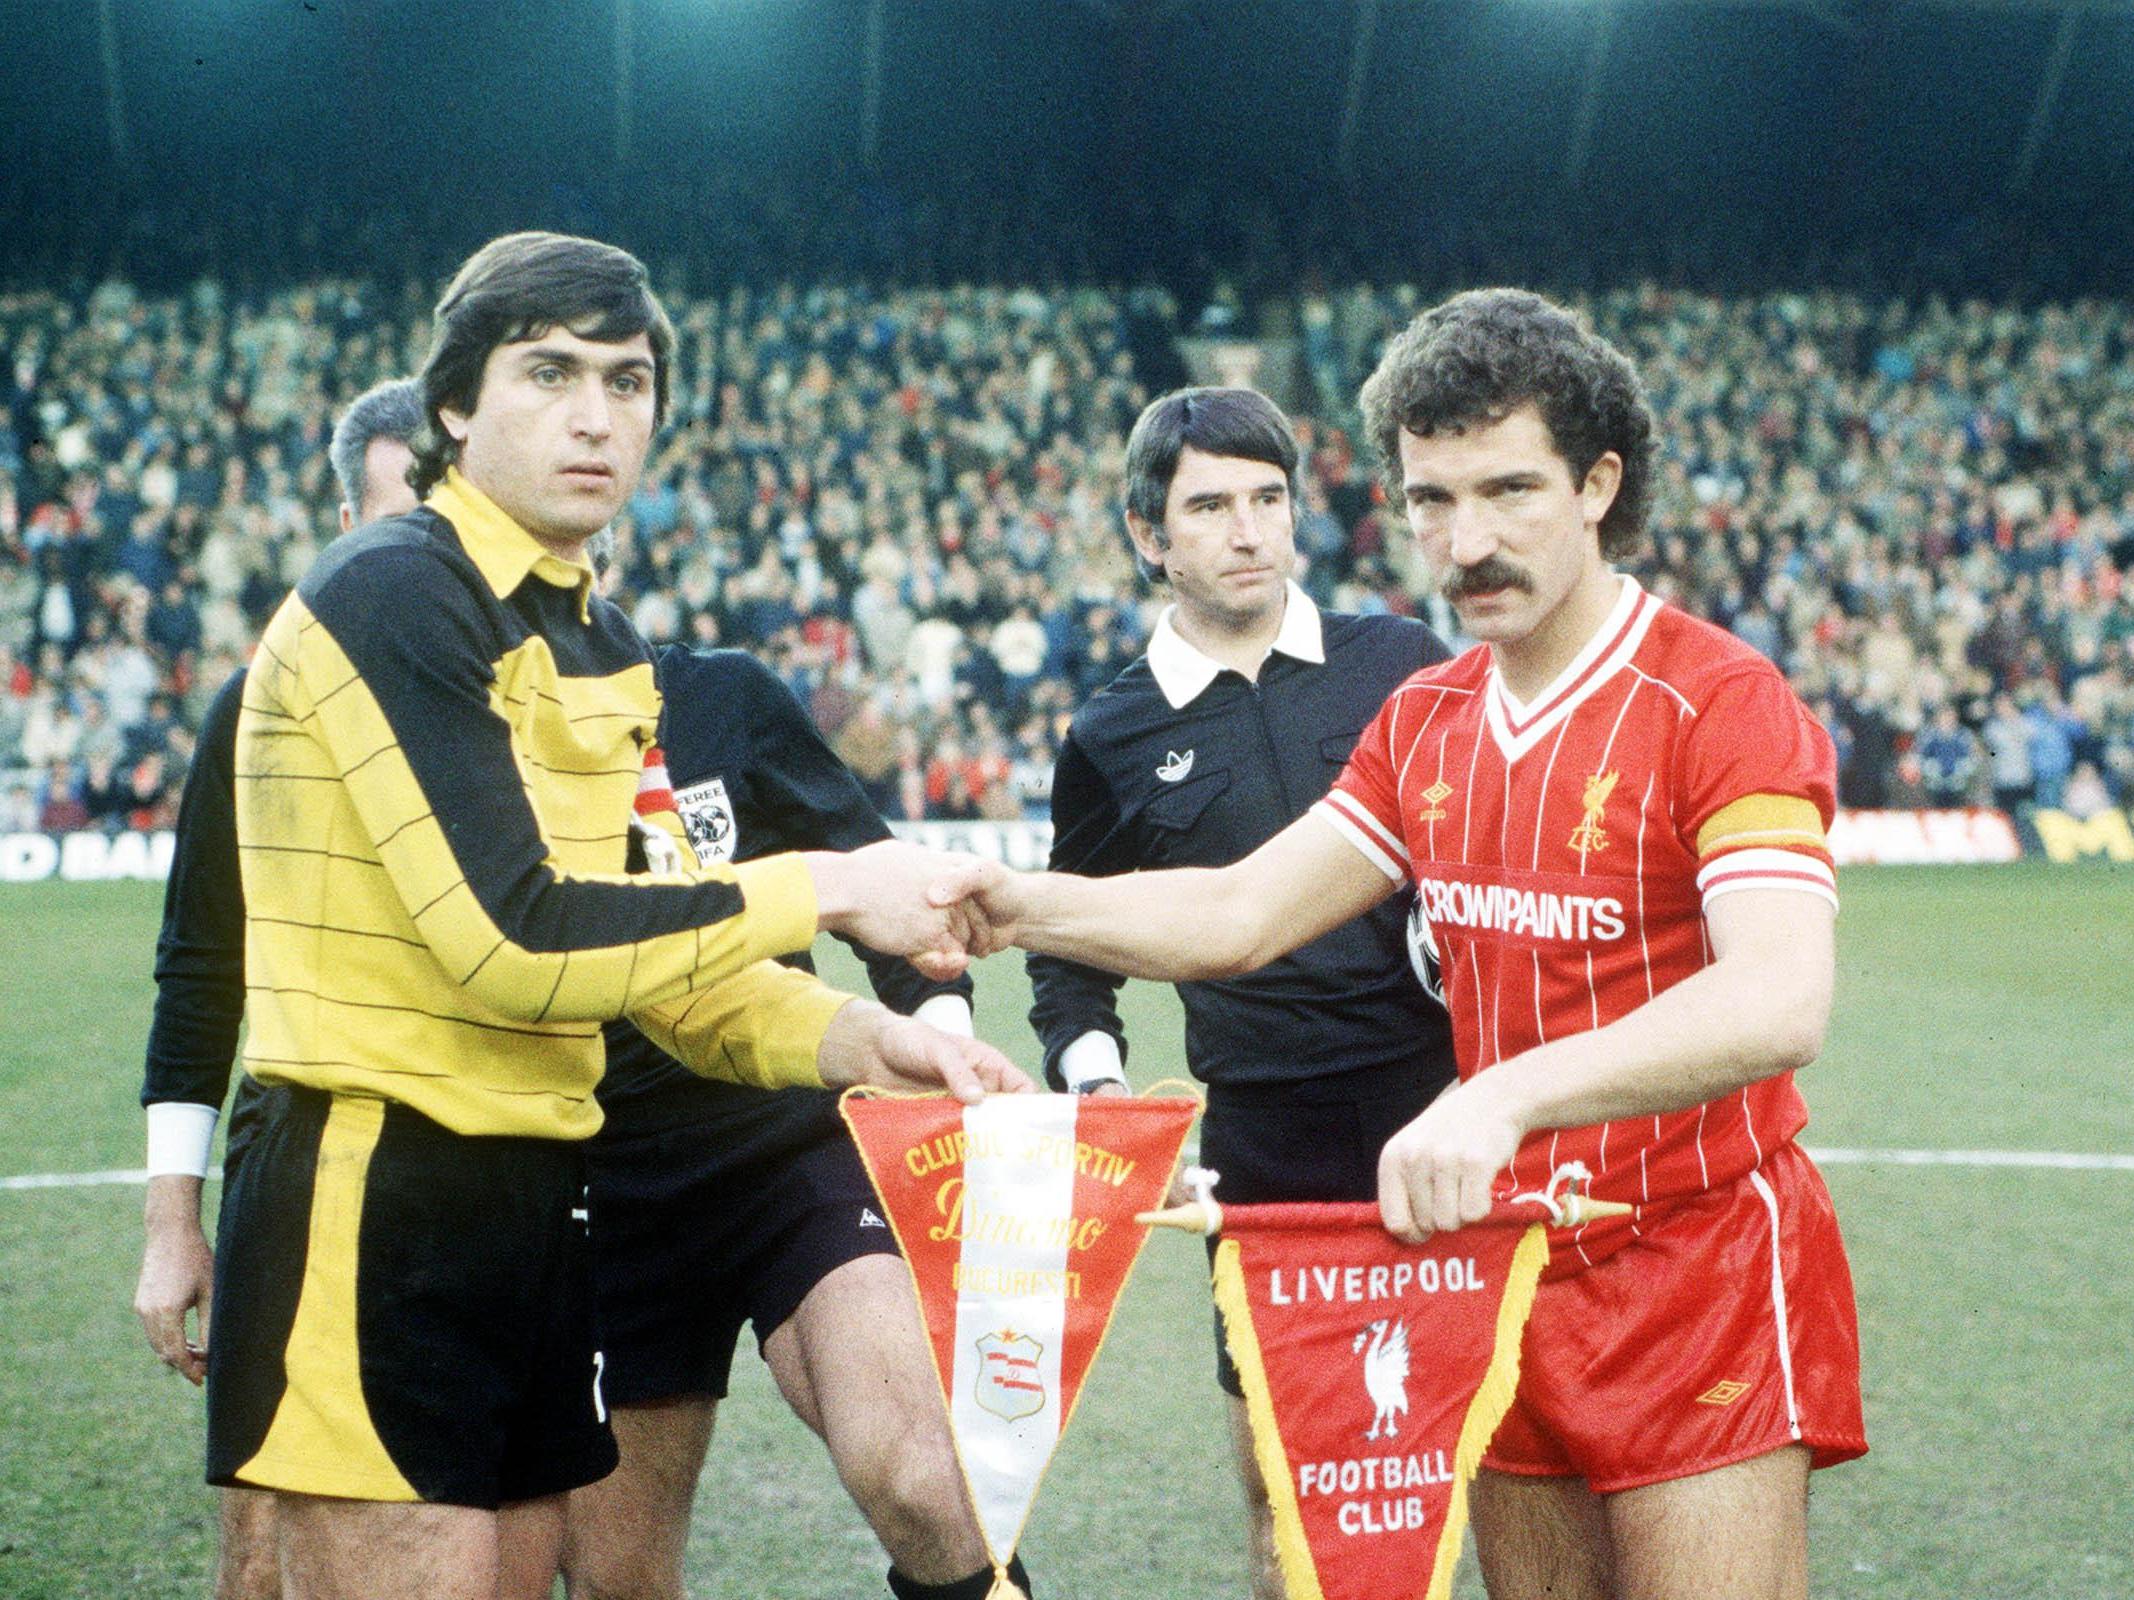 Graeme Souness, right, shakes hands with Dumitru Moraru at Anfield